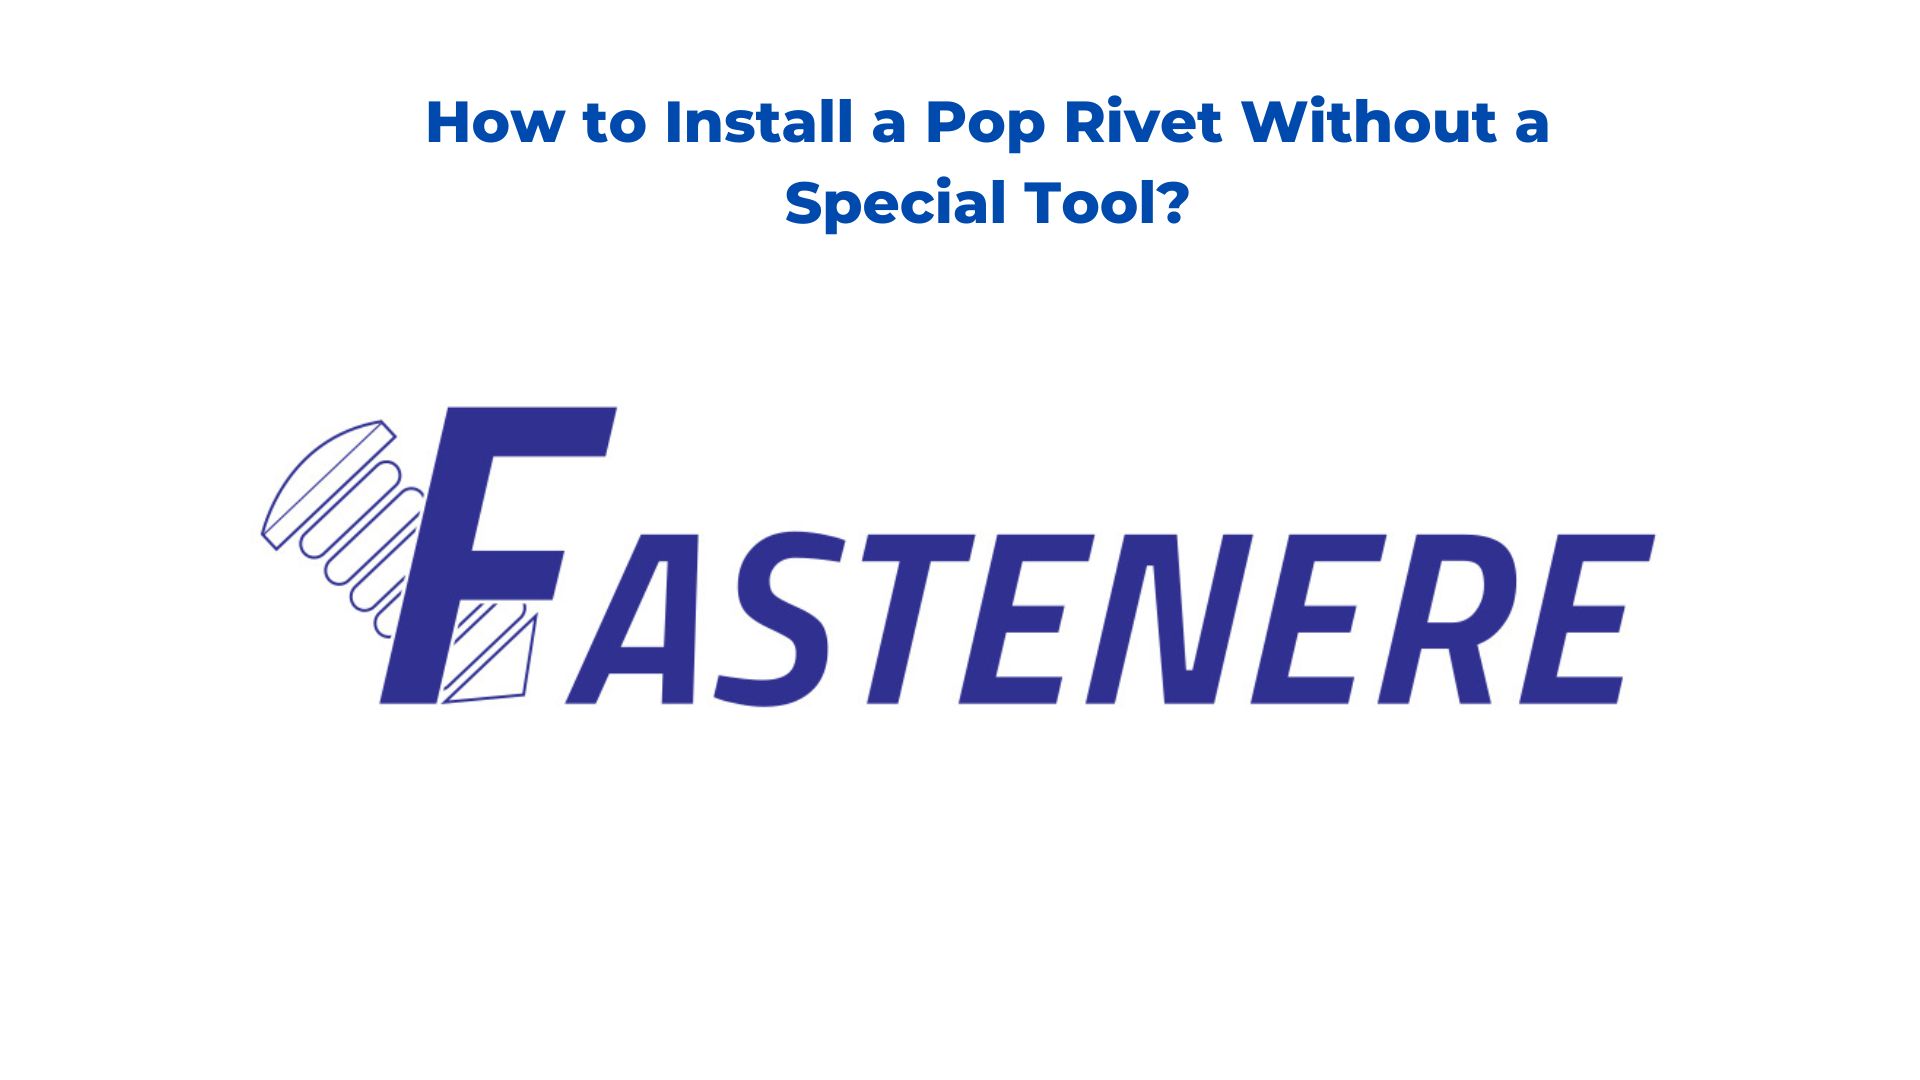 How to Install a Pop Rivet Without a Special Tool?